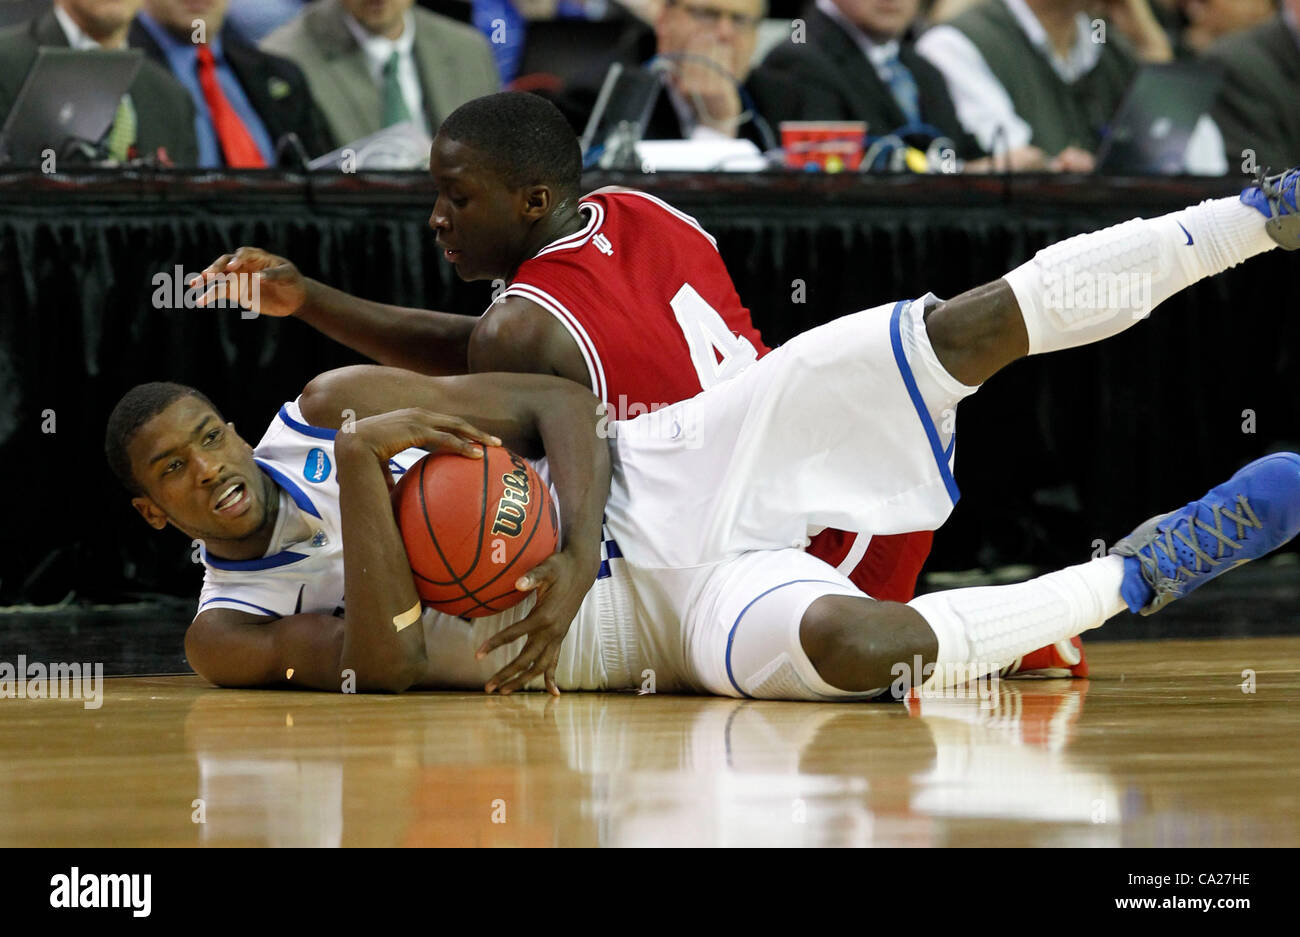 March 24, 2012 - Atlanta, GA, USA - Kentucky Wildcats forward Michael Kidd-Gilchrist (14) came up with a loose ball and called timeout with Indiana Hoosiers guard Victor Oladipo (4) on his back as the University of Kentucky played Indiana University in the NCAA South Regional semifinal the Georgia D Stock Photo